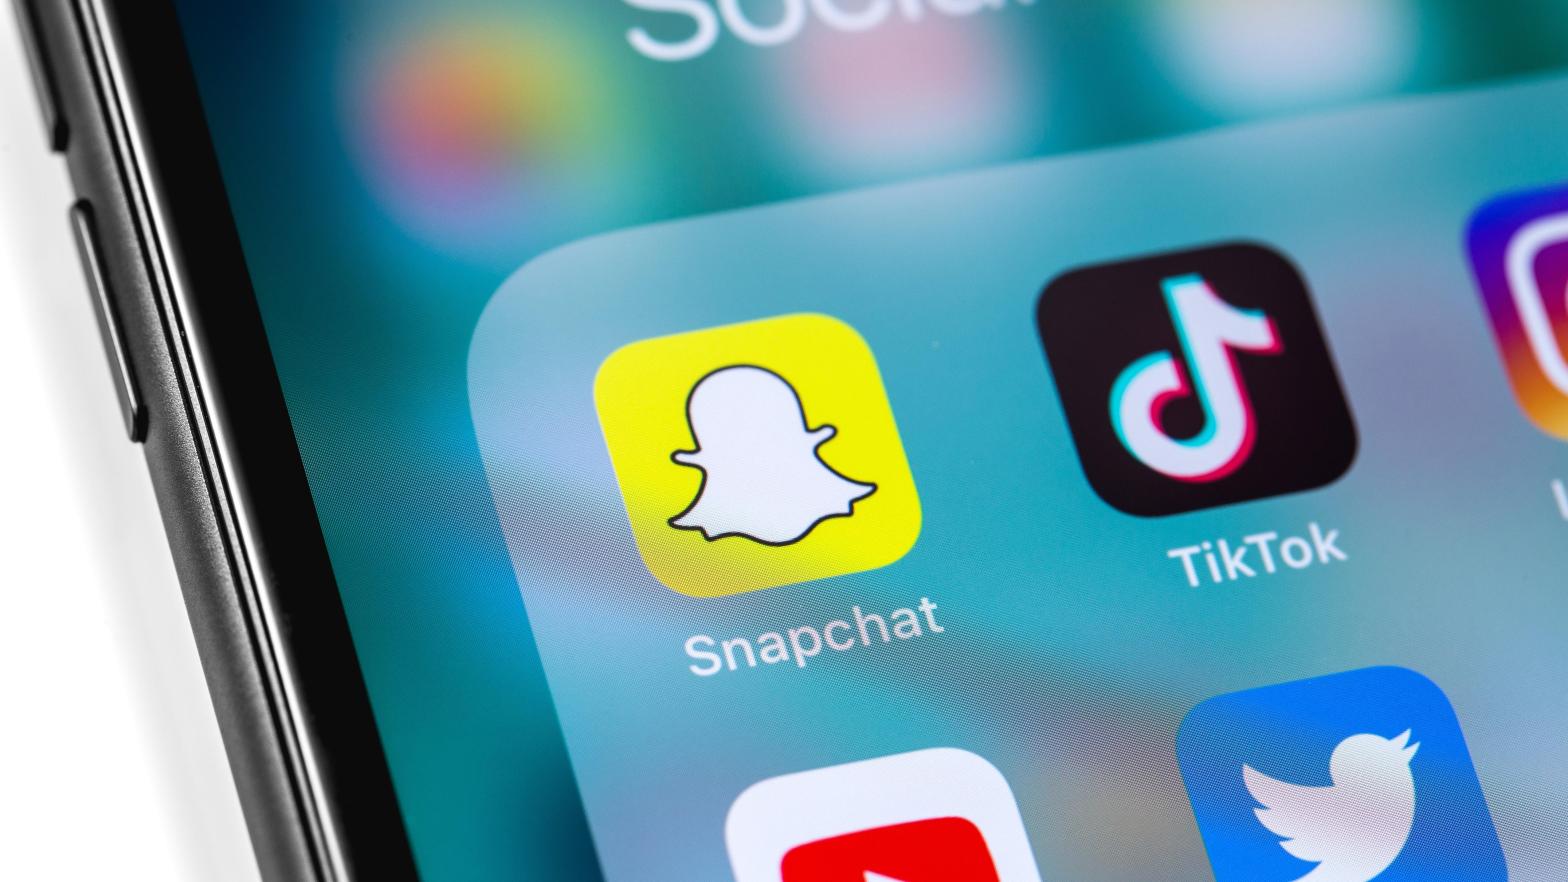 Snapchat unveiled Sounds to the masses in October 2020. (Image: Primakov, Shutterstock)